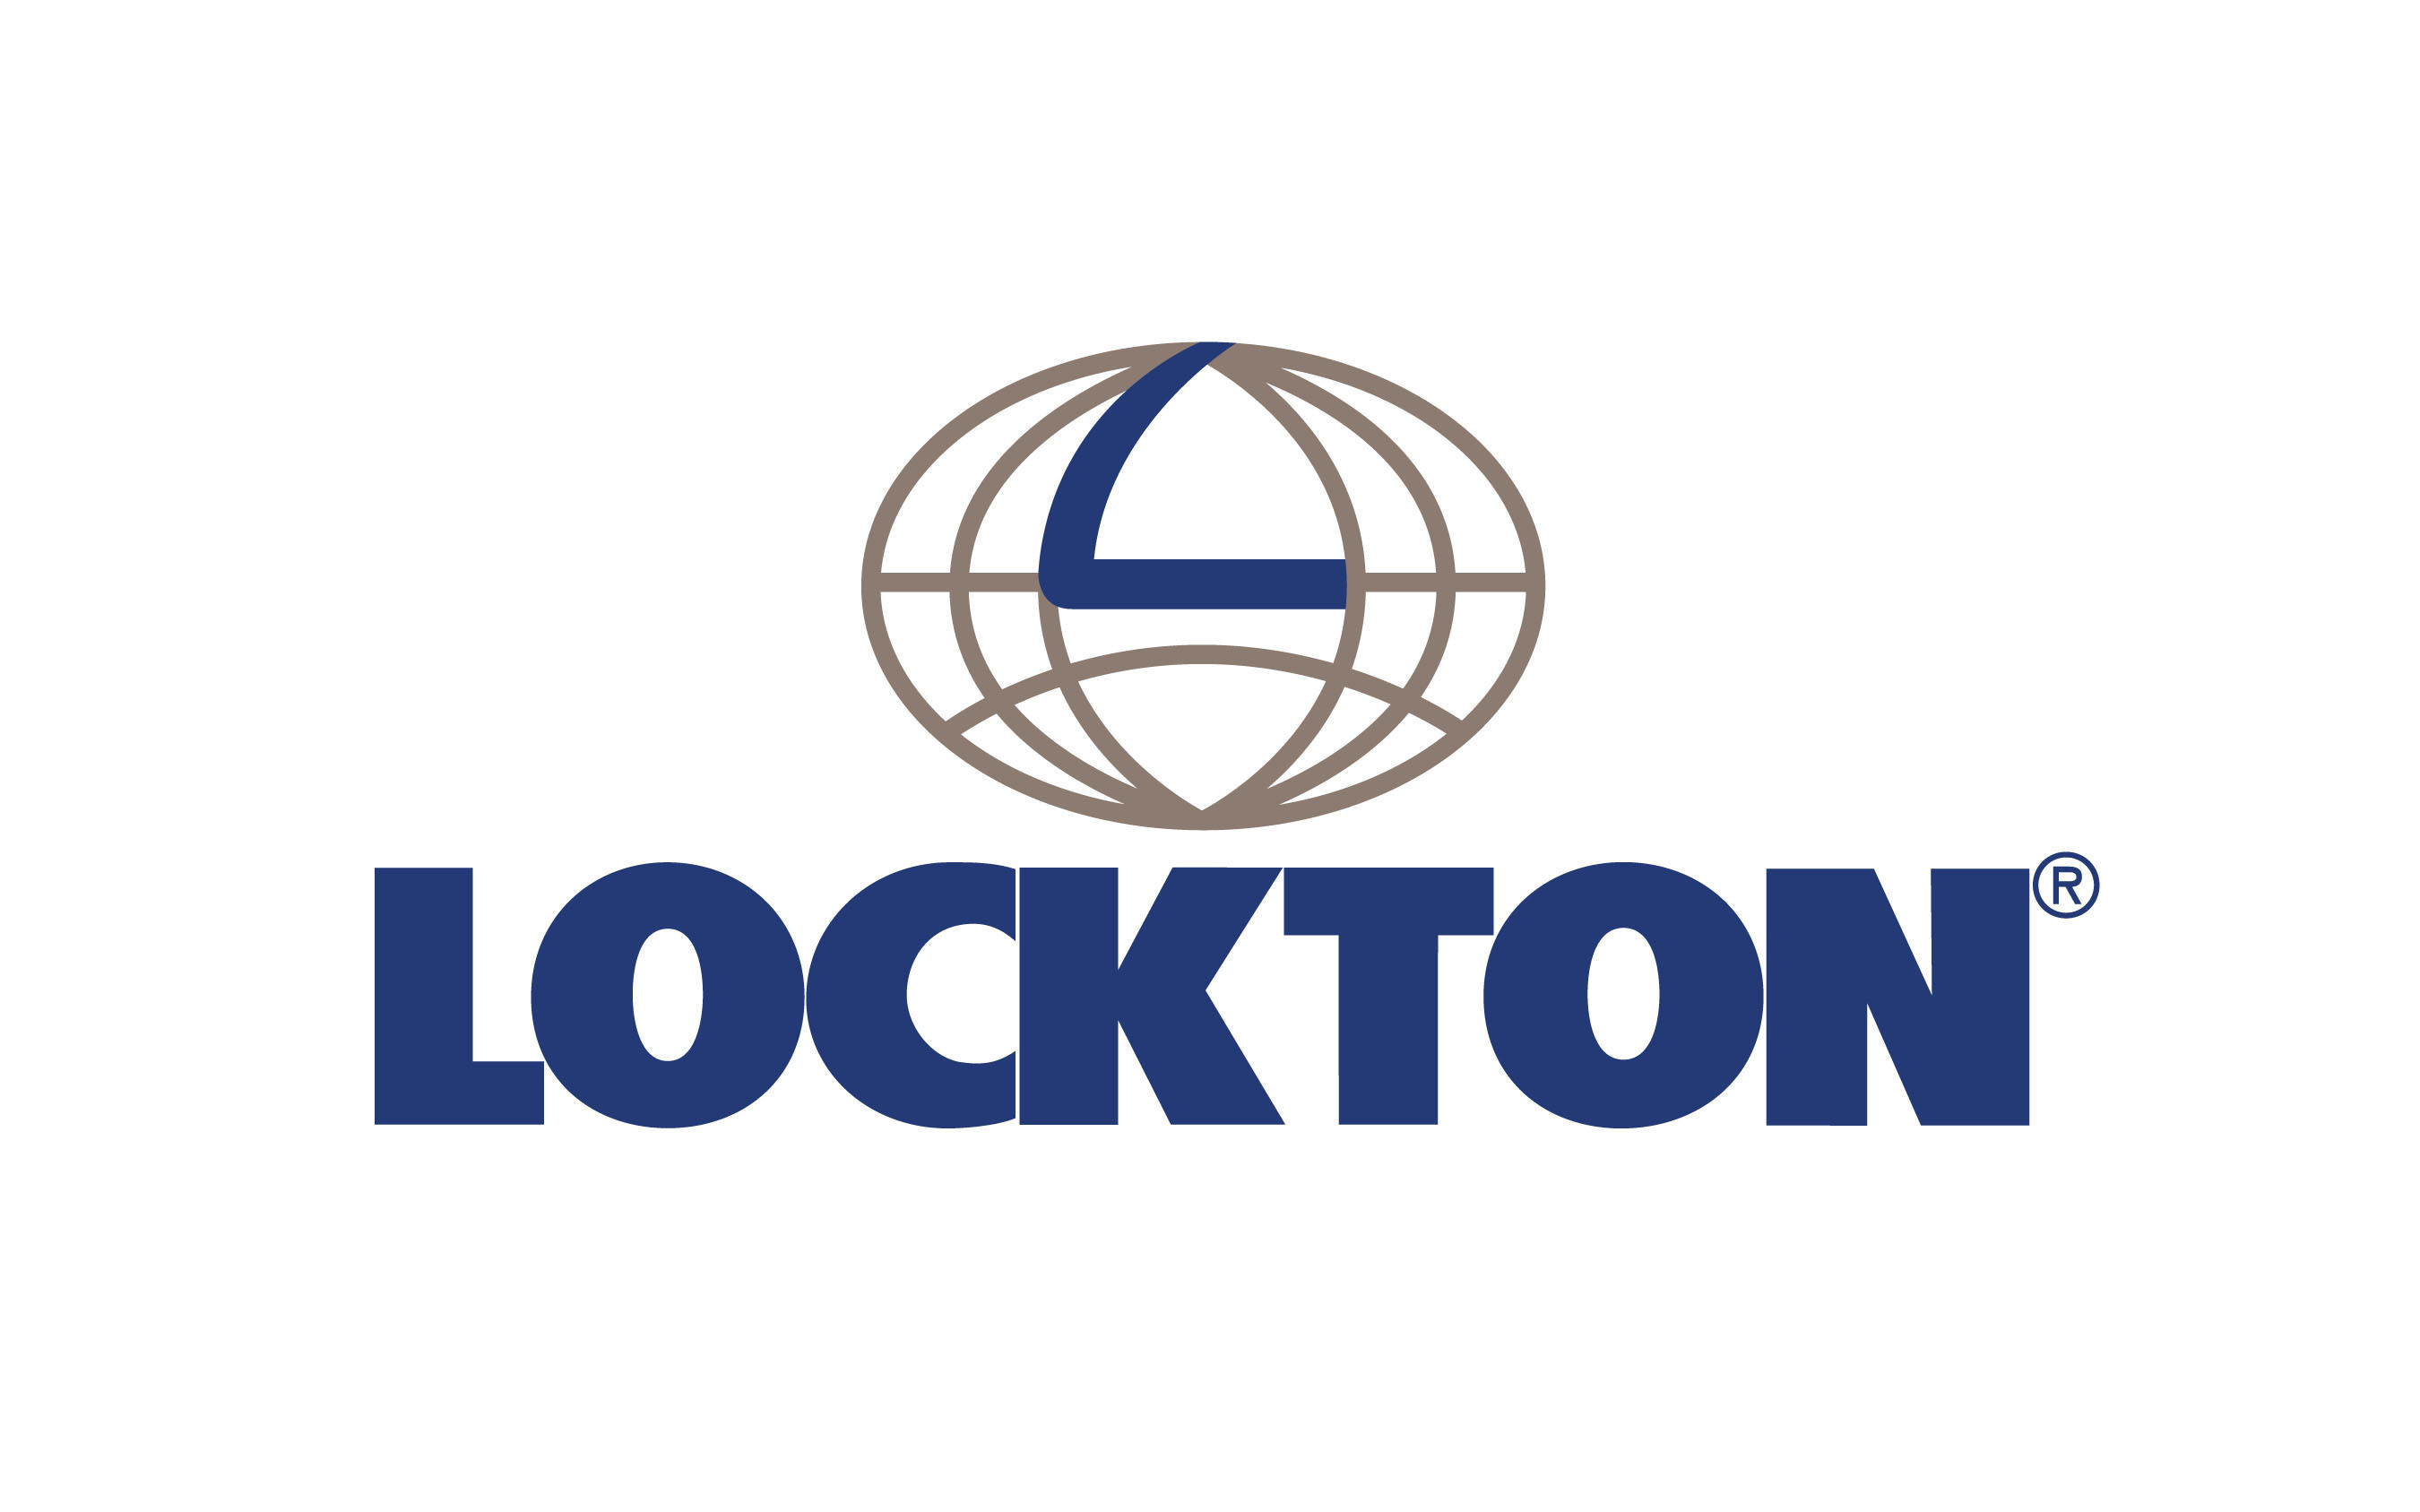 Troy Cook takes CFO role at Lockton